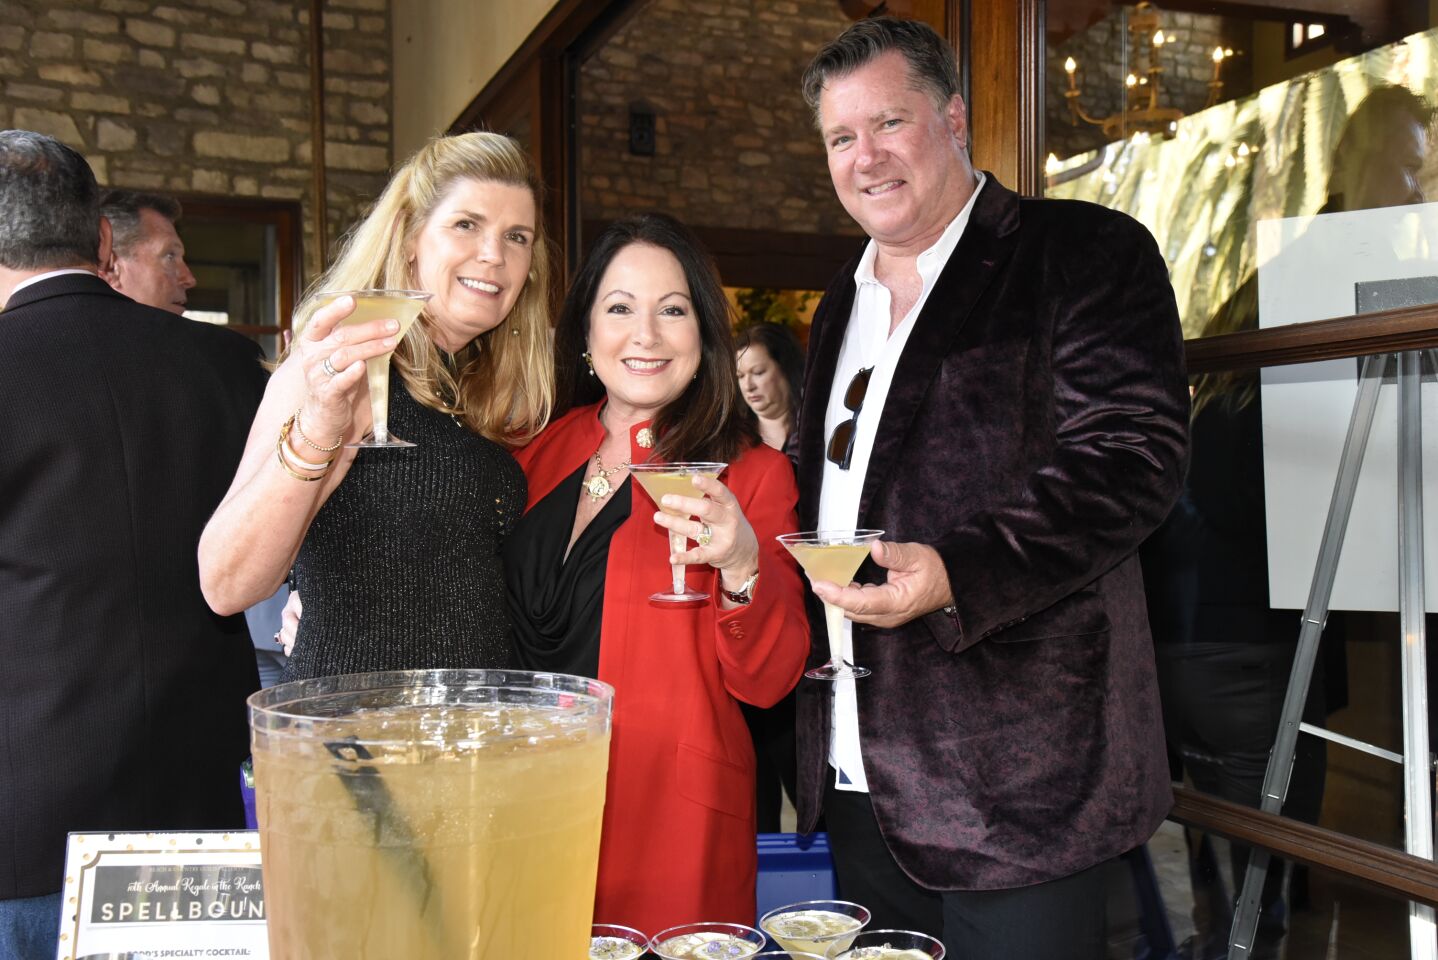 BCG President Cathy Miller, Gala co-chair Maria Parnell and Todd Parnell, enjoying lavender martinis